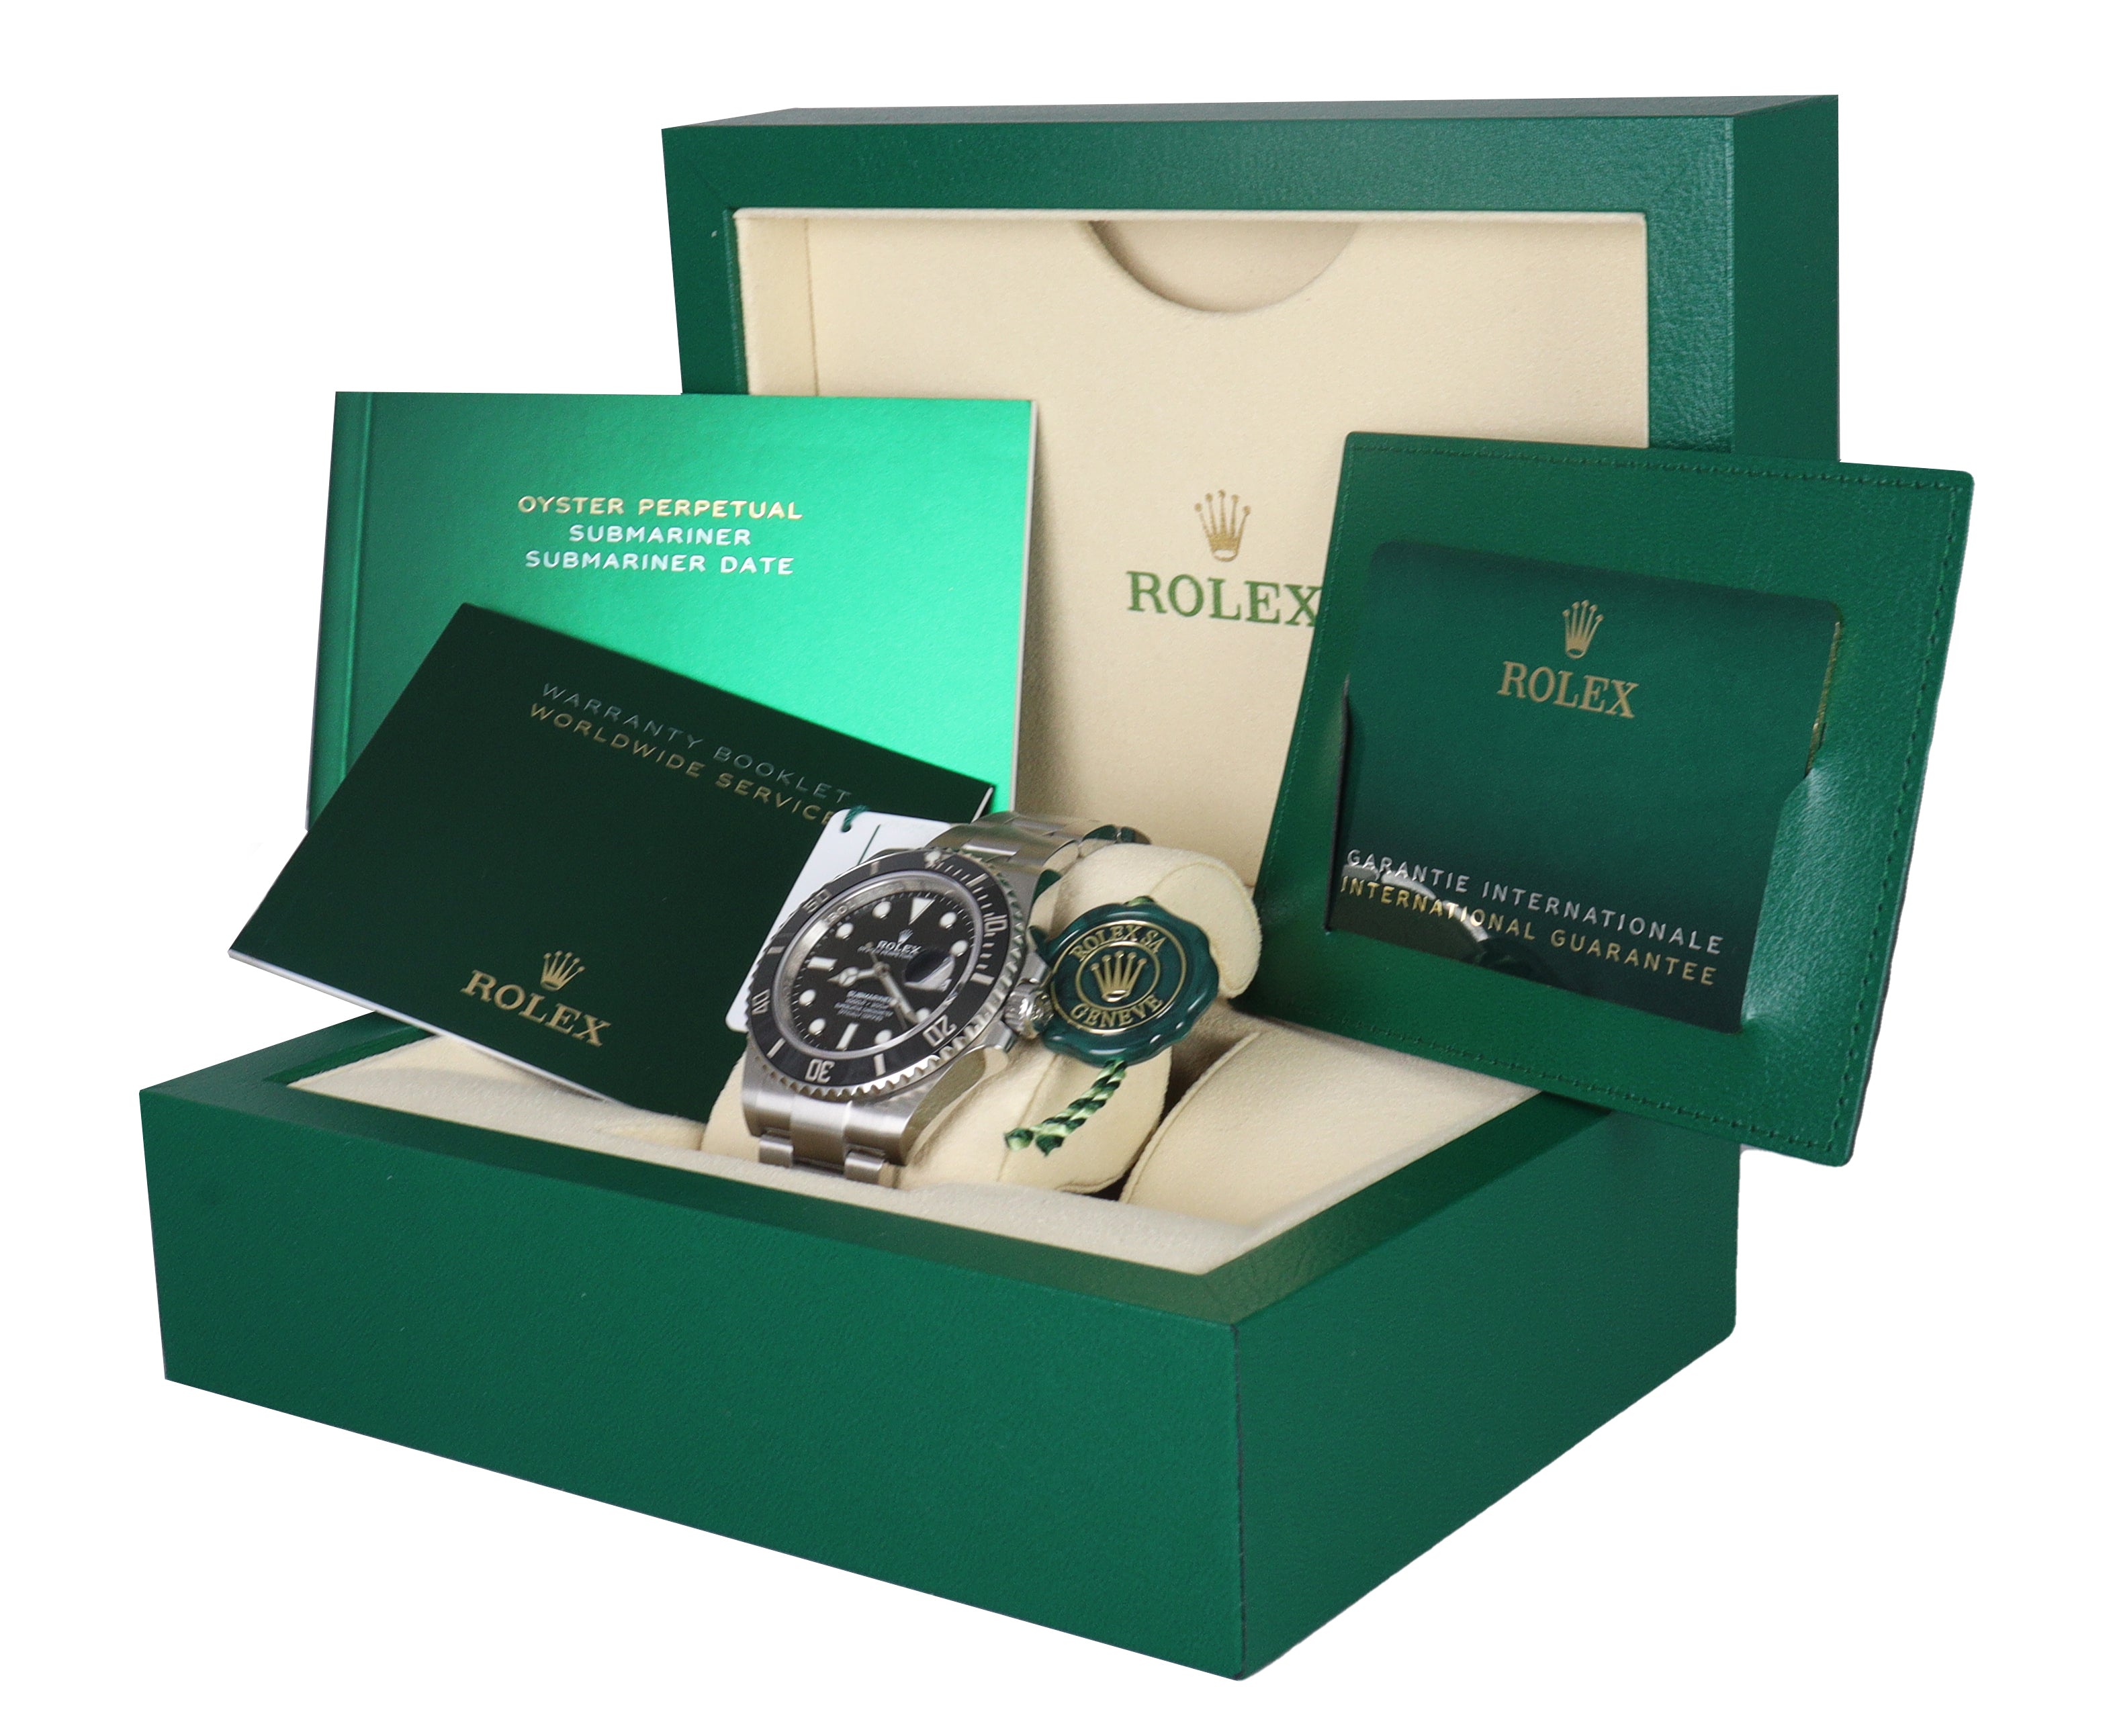 NEW MAY 2021 Rolex Submariner 41 Date Stainless Black Ceramic Watch 126610 LN